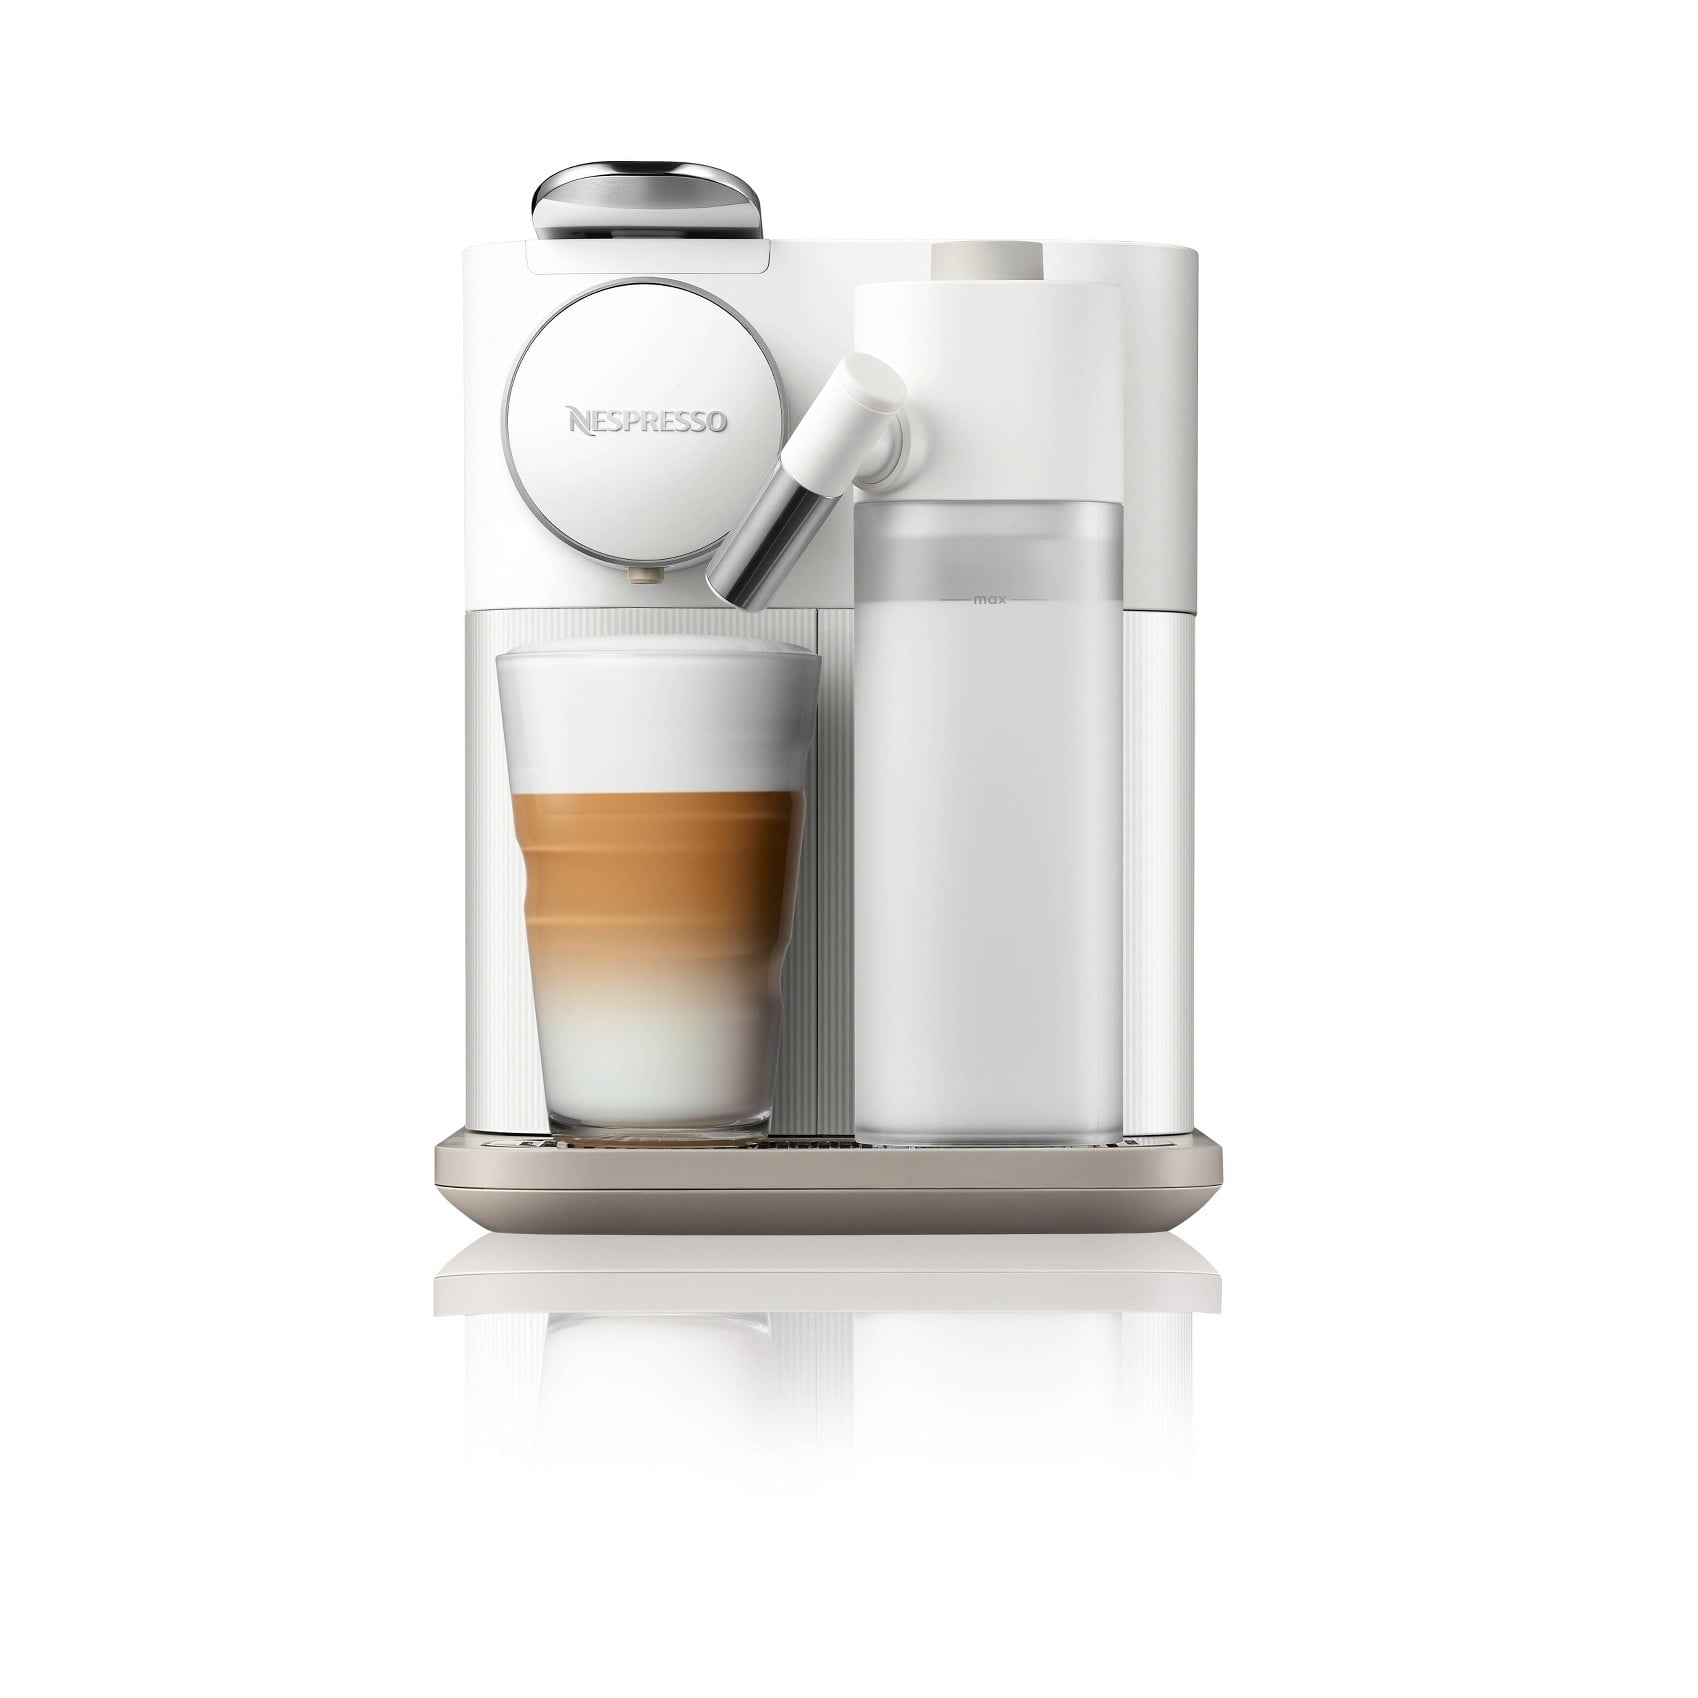 kollision Algebraisk acceleration A Dream Coffee Maker: Nespresso Gran Lattissima Fresh Espresso Maker | 15  Home Items You Can Find Us Obsessing Over at Target This August | POPSUGAR  Home Photo 16